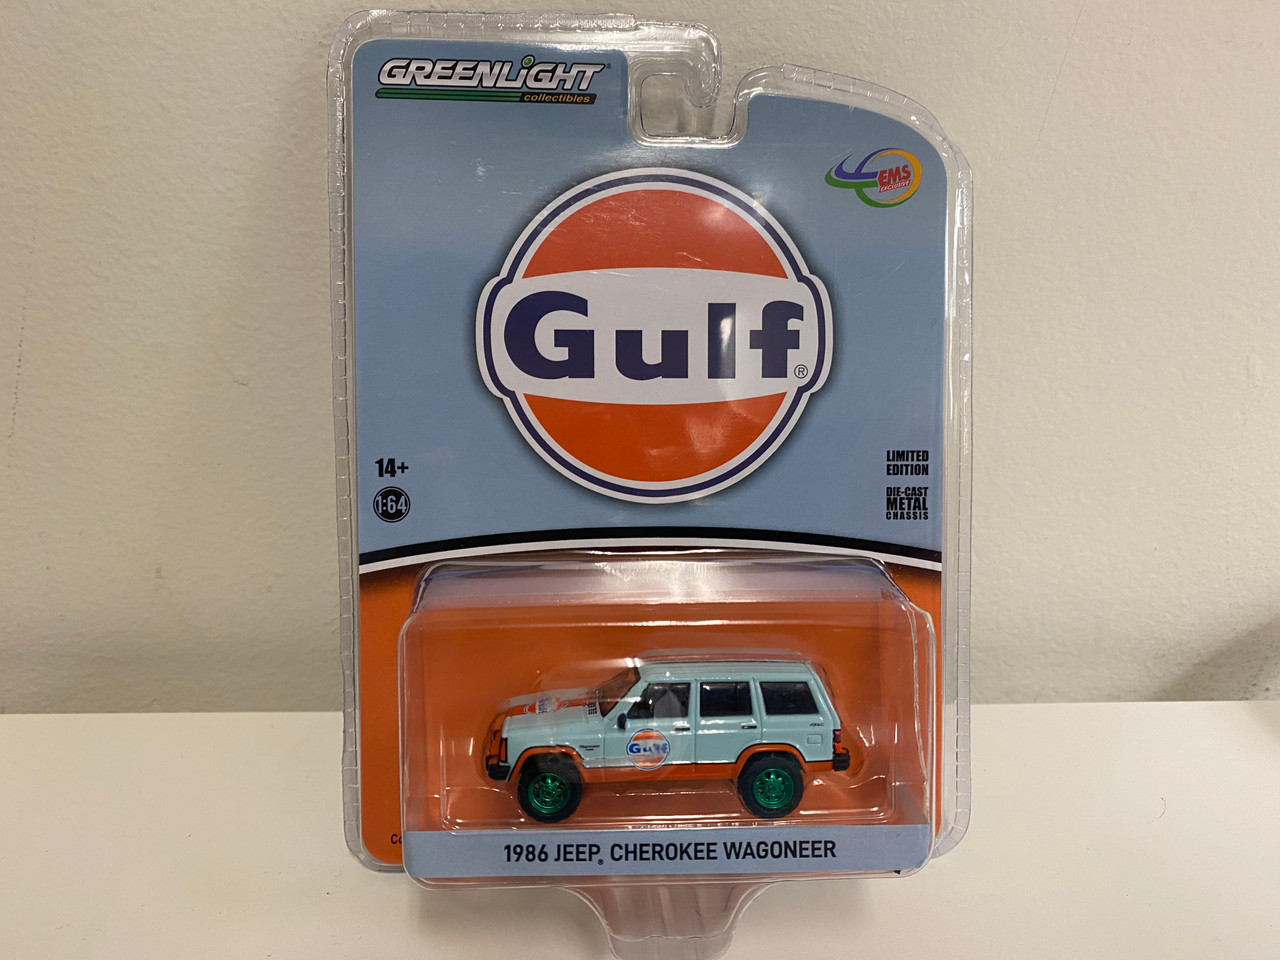 CHASE CAR 1/64 Greenlight Indonesia Exclusive 1986 Jeep Cherokee Wagoneer GULF Livery Limited Edition Diecast Car Model